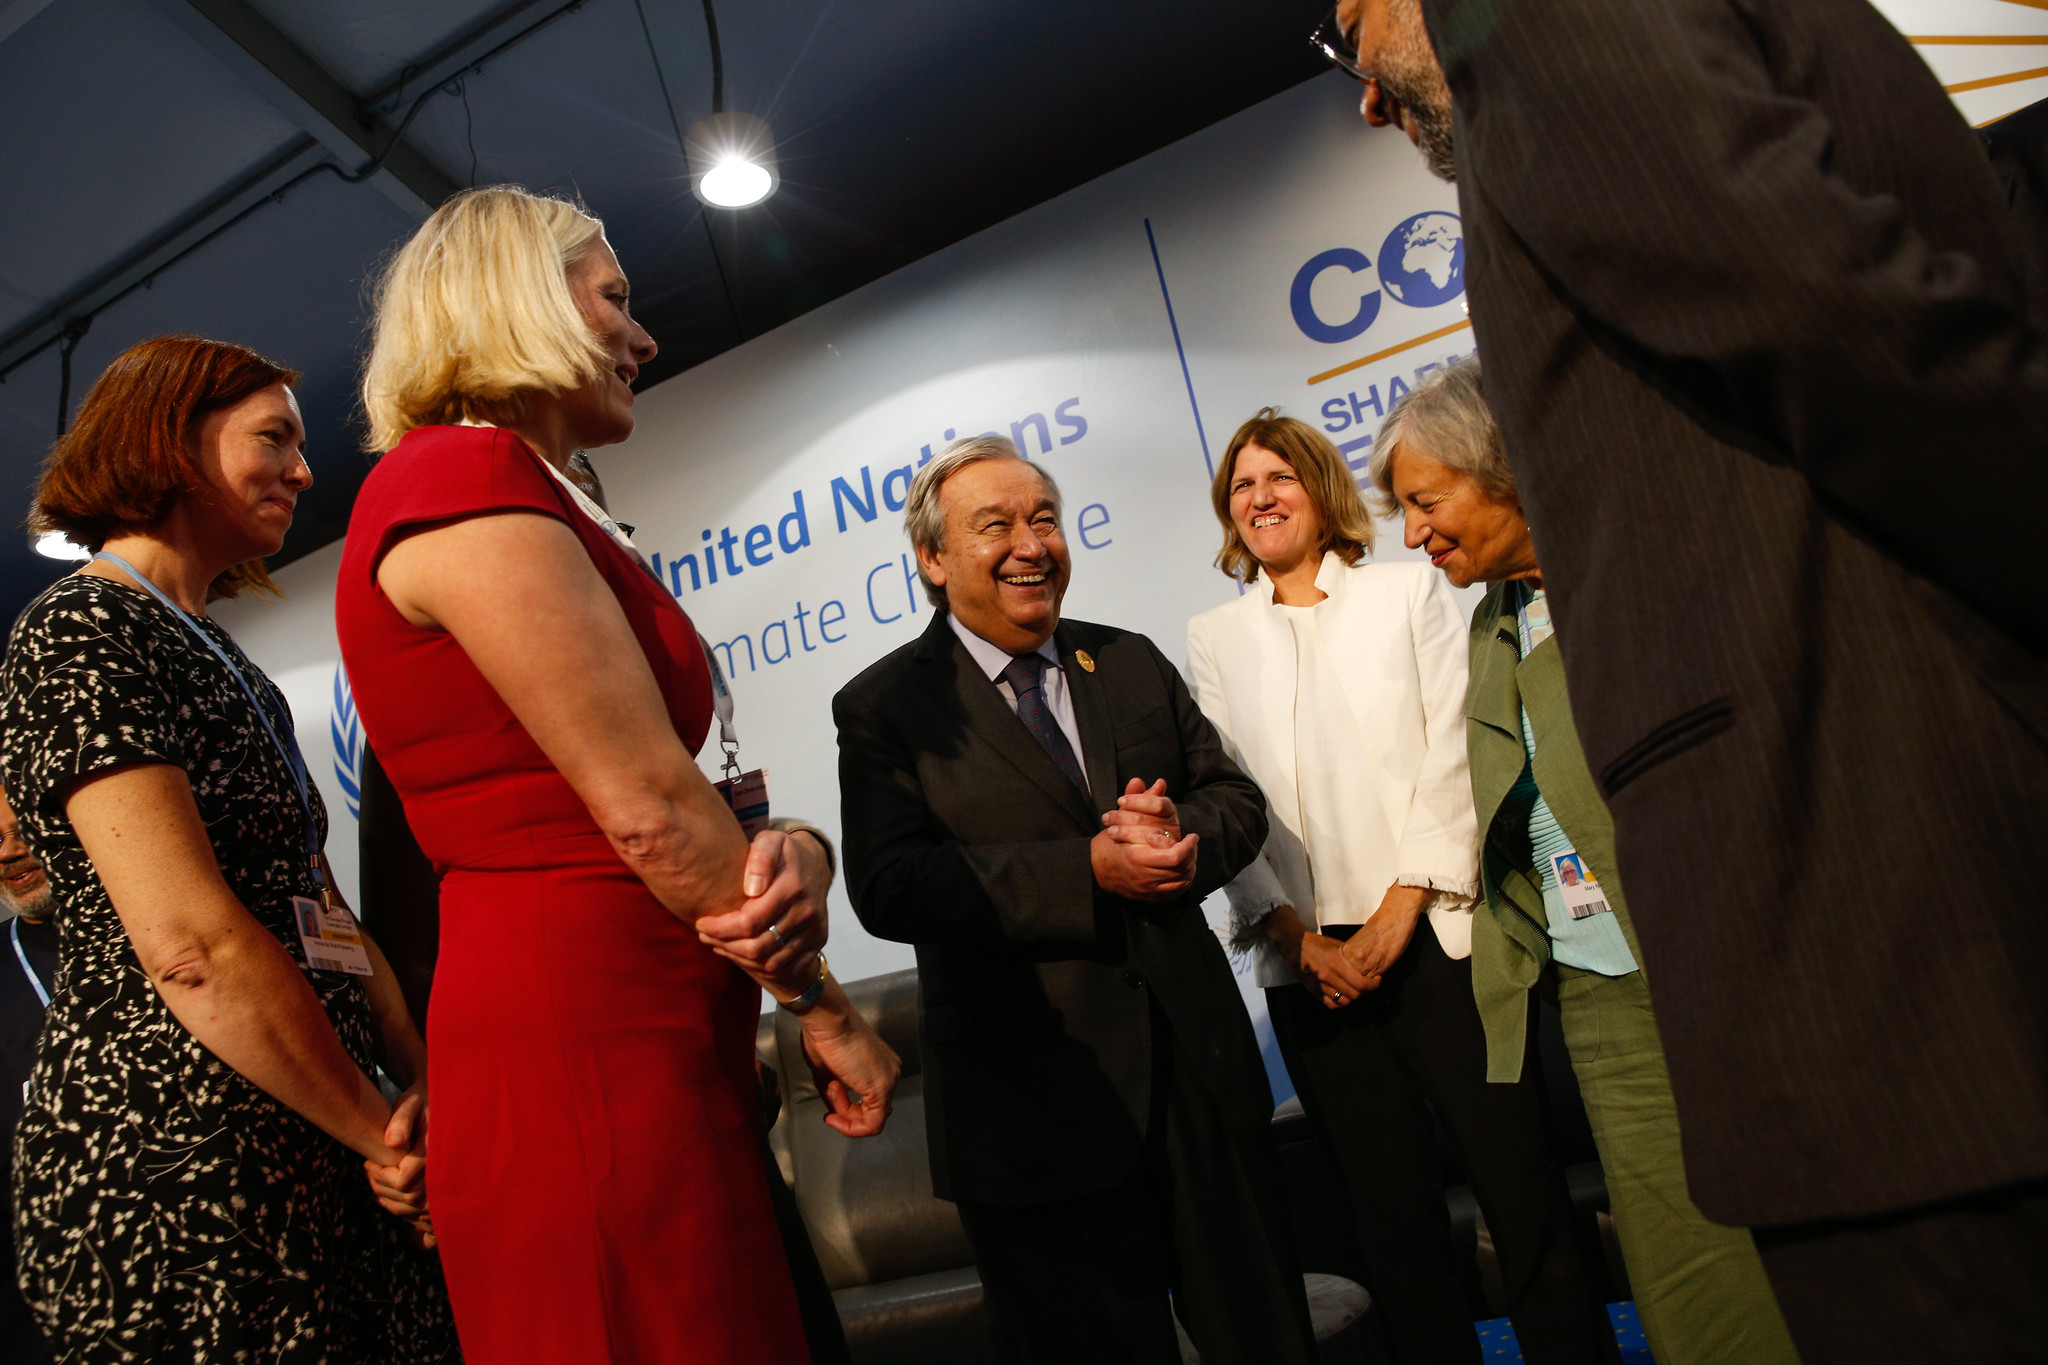 The UN Secretary General Antonio Guterres speaking with members of the Net Zero Expert Group during COP27 - in the photo, Catherine Mackenna is also on focus